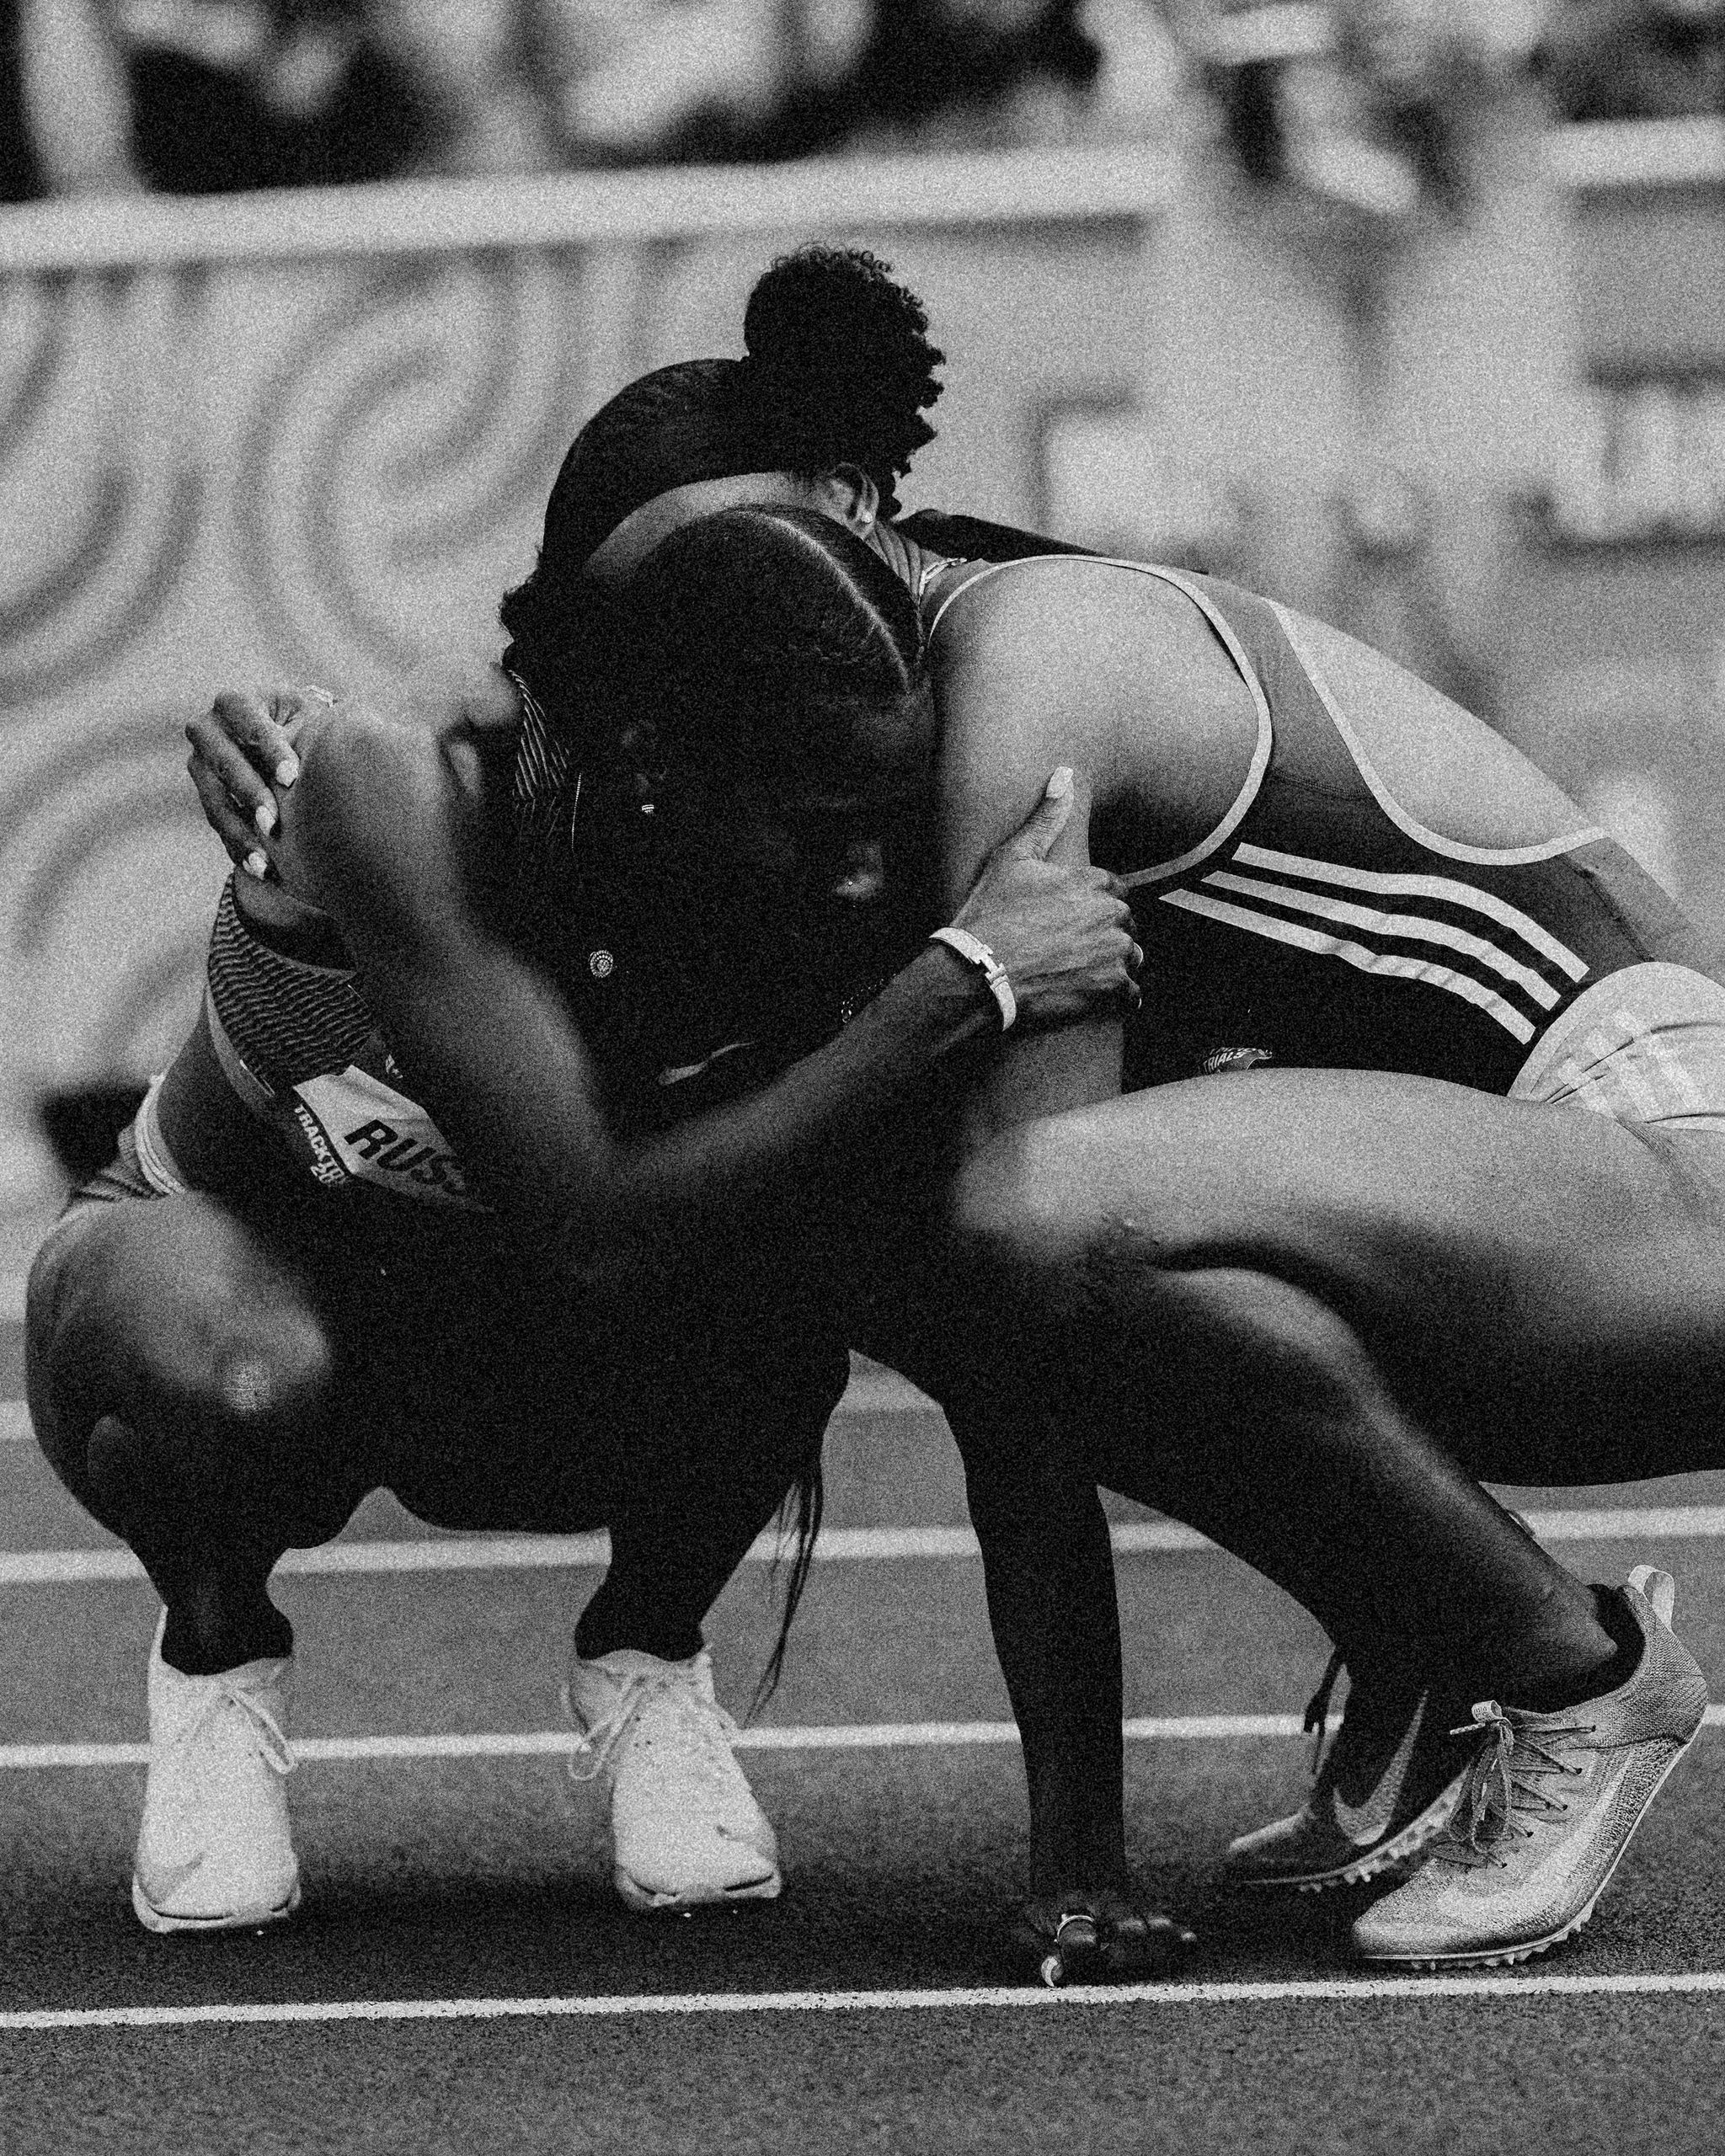 two women track athletes hug after a race